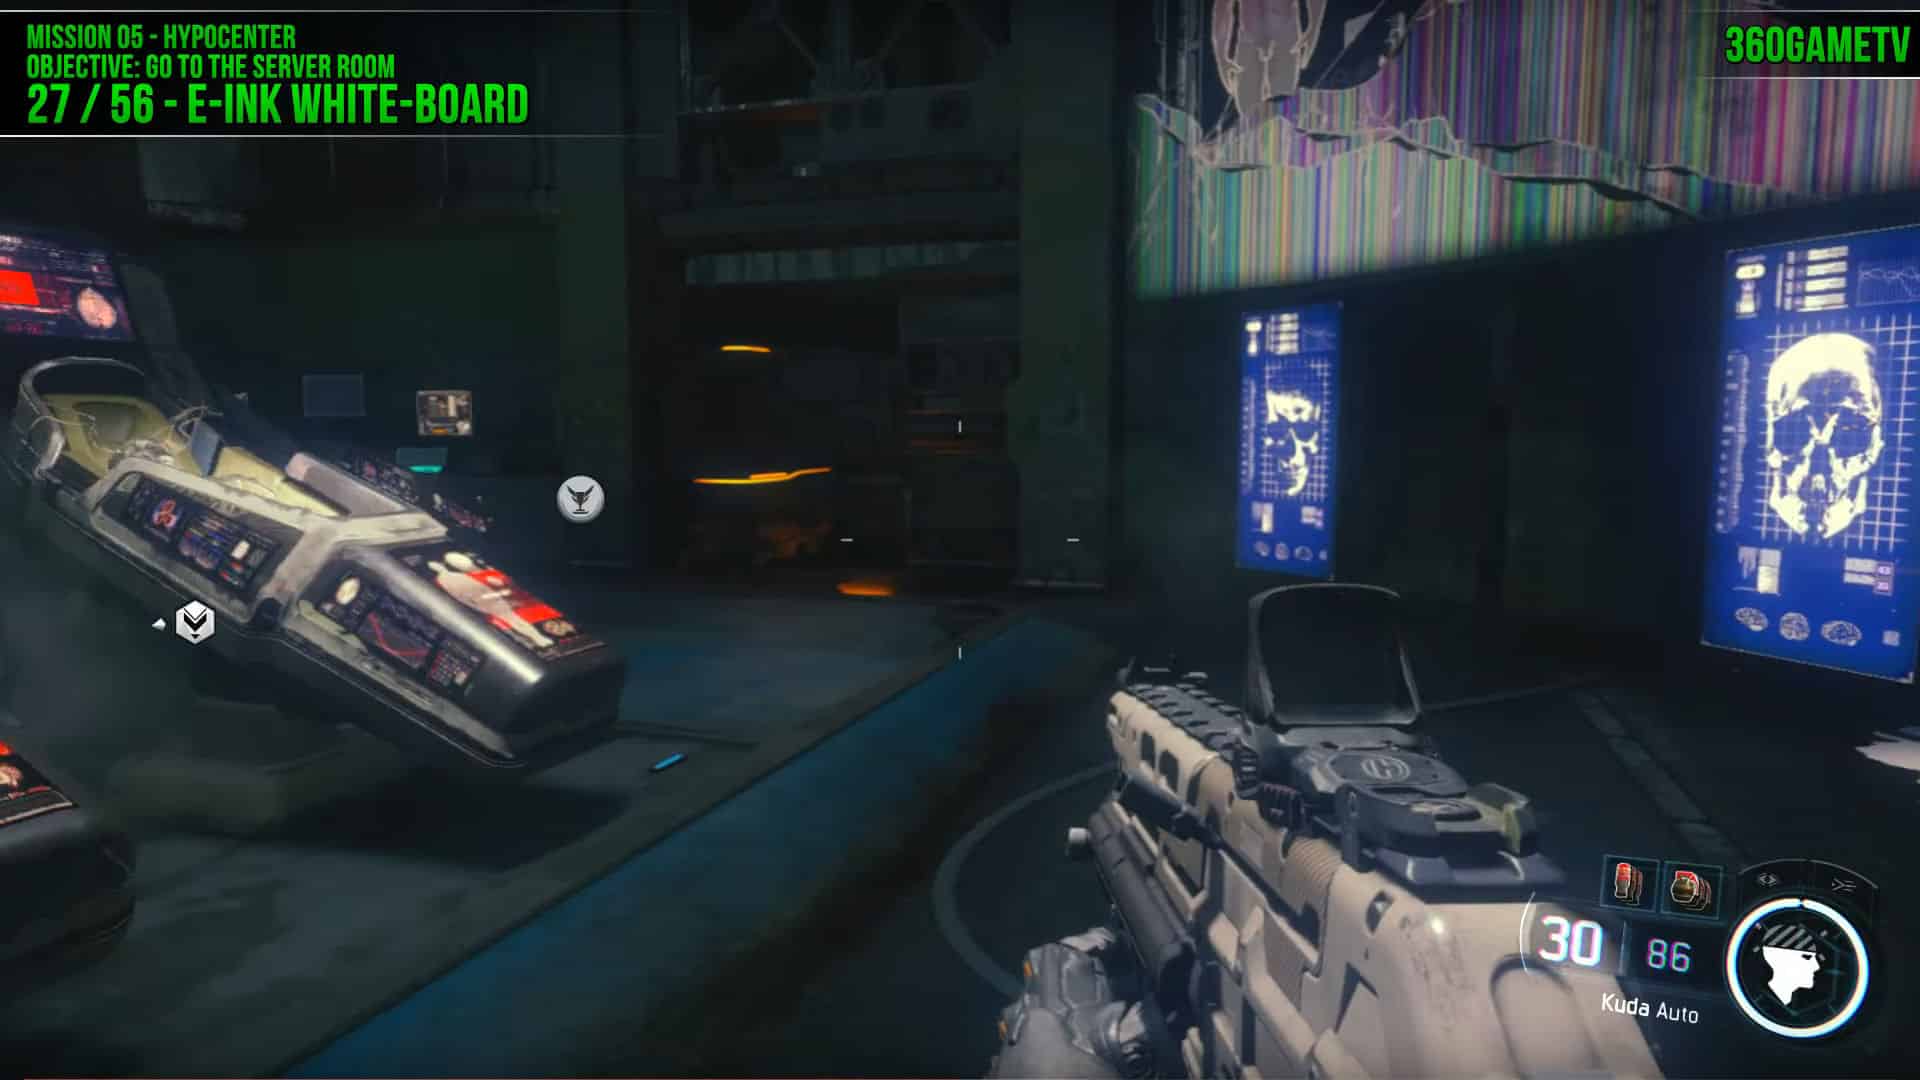 Call of Duty: Black Ops 3 E-Ink White-Board Location in Mission 5: Hypocenter1920 x 1080